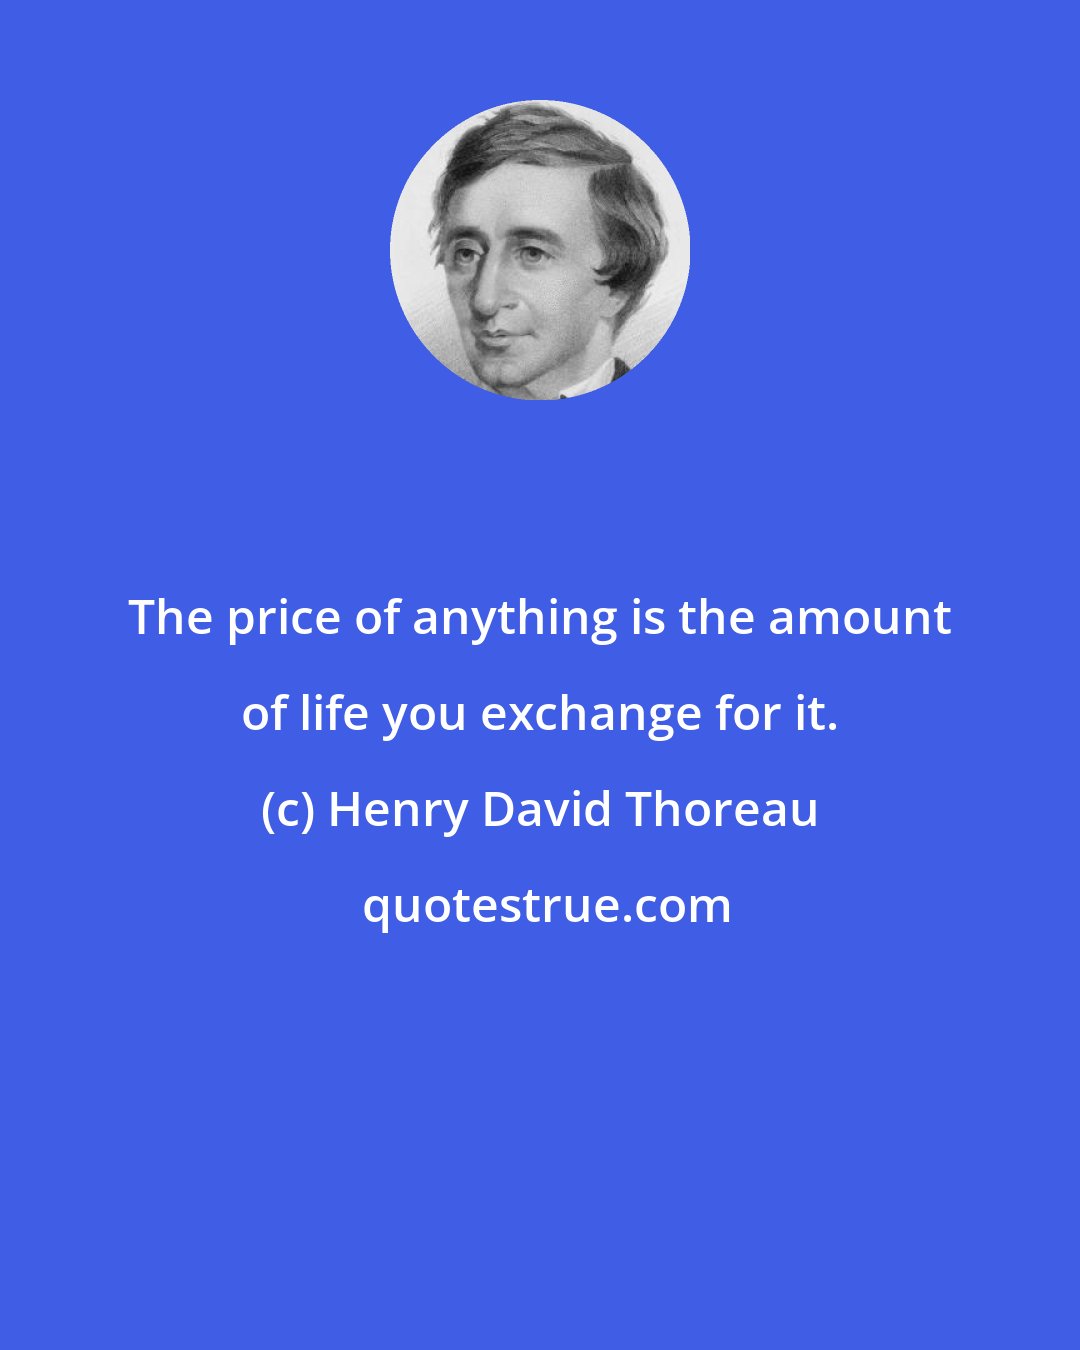 Henry David Thoreau: The price of anything is the amount of life you exchange for it.